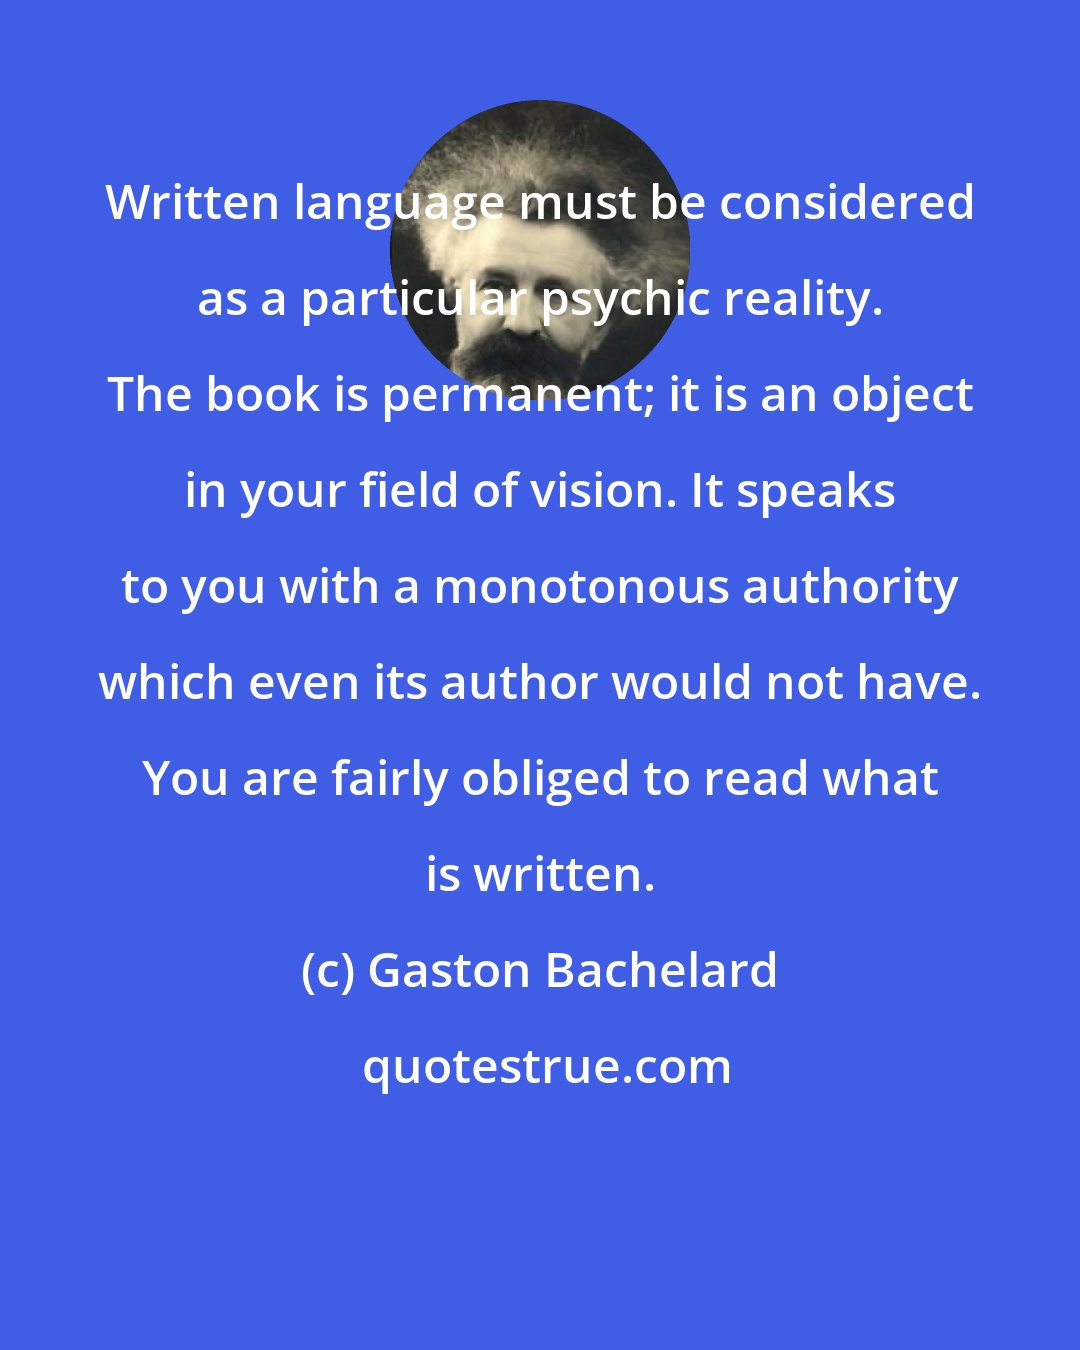 Gaston Bachelard: Written language must be considered as a particular psychic reality. The book is permanent; it is an object in your field of vision. It speaks to you with a monotonous authority which even its author would not have. You are fairly obliged to read what is written.